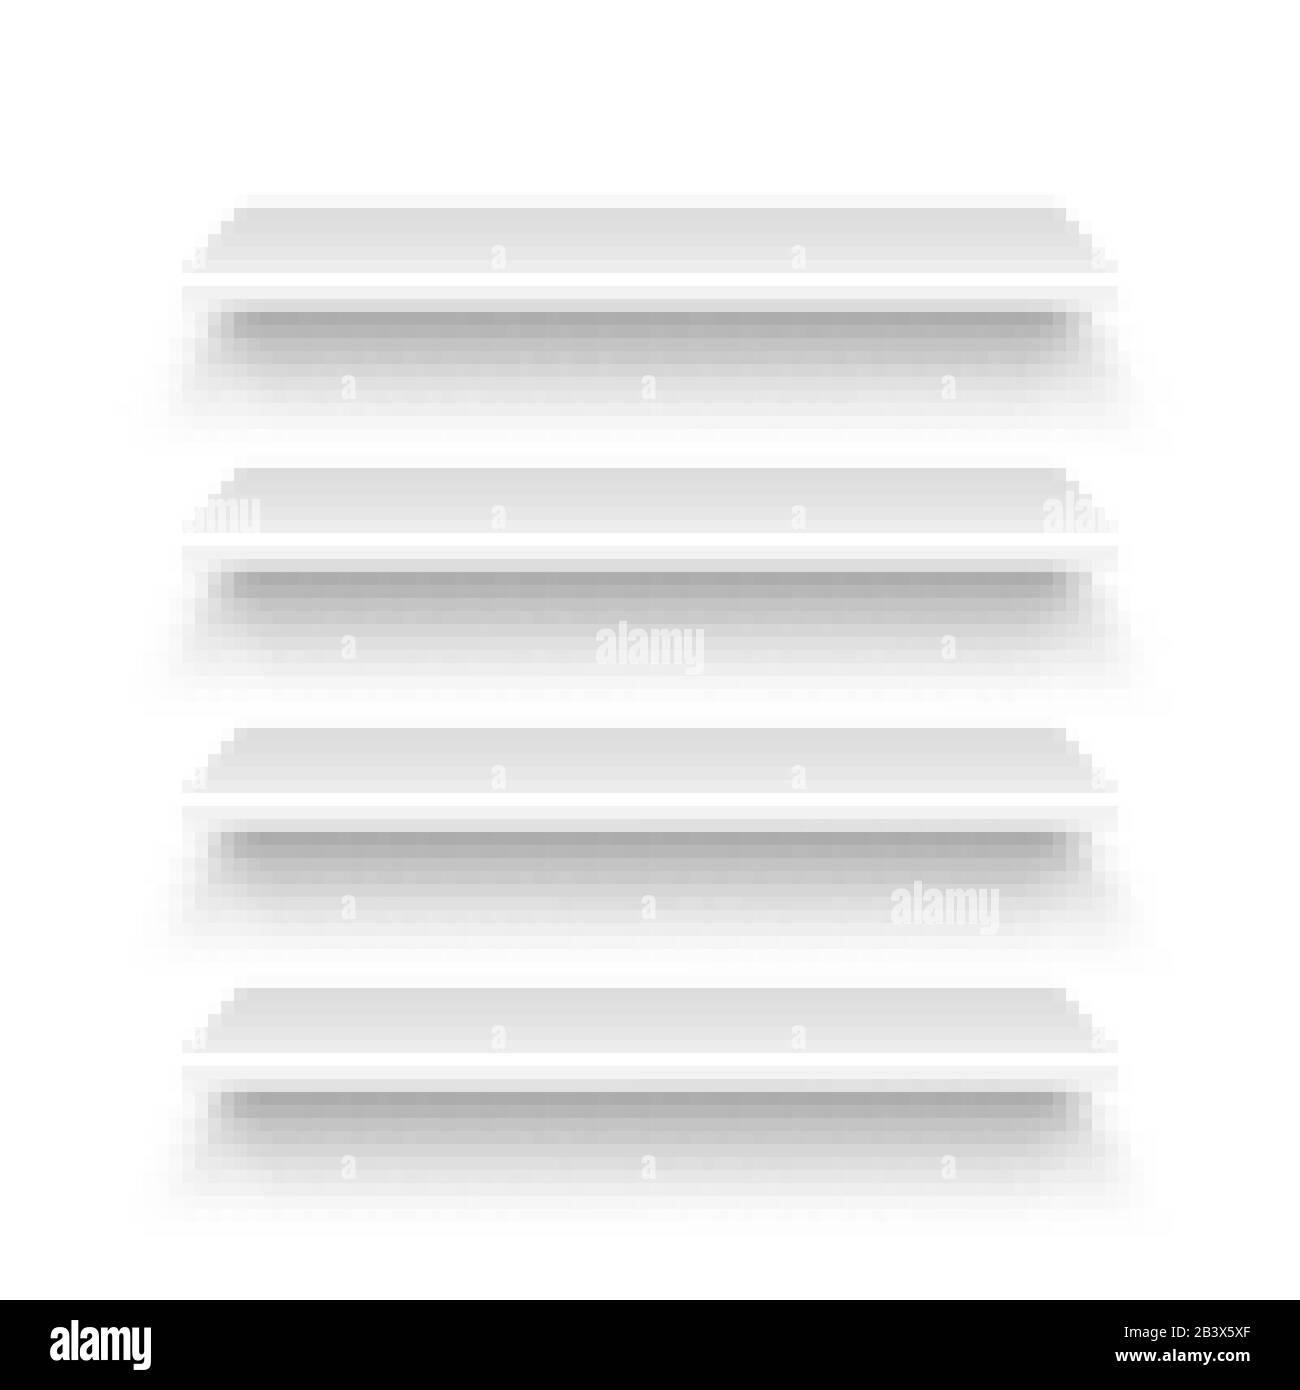 Realistic empty store shelves set. Product shelf. Grocery wall rack. Vector illustration. Stock Vector